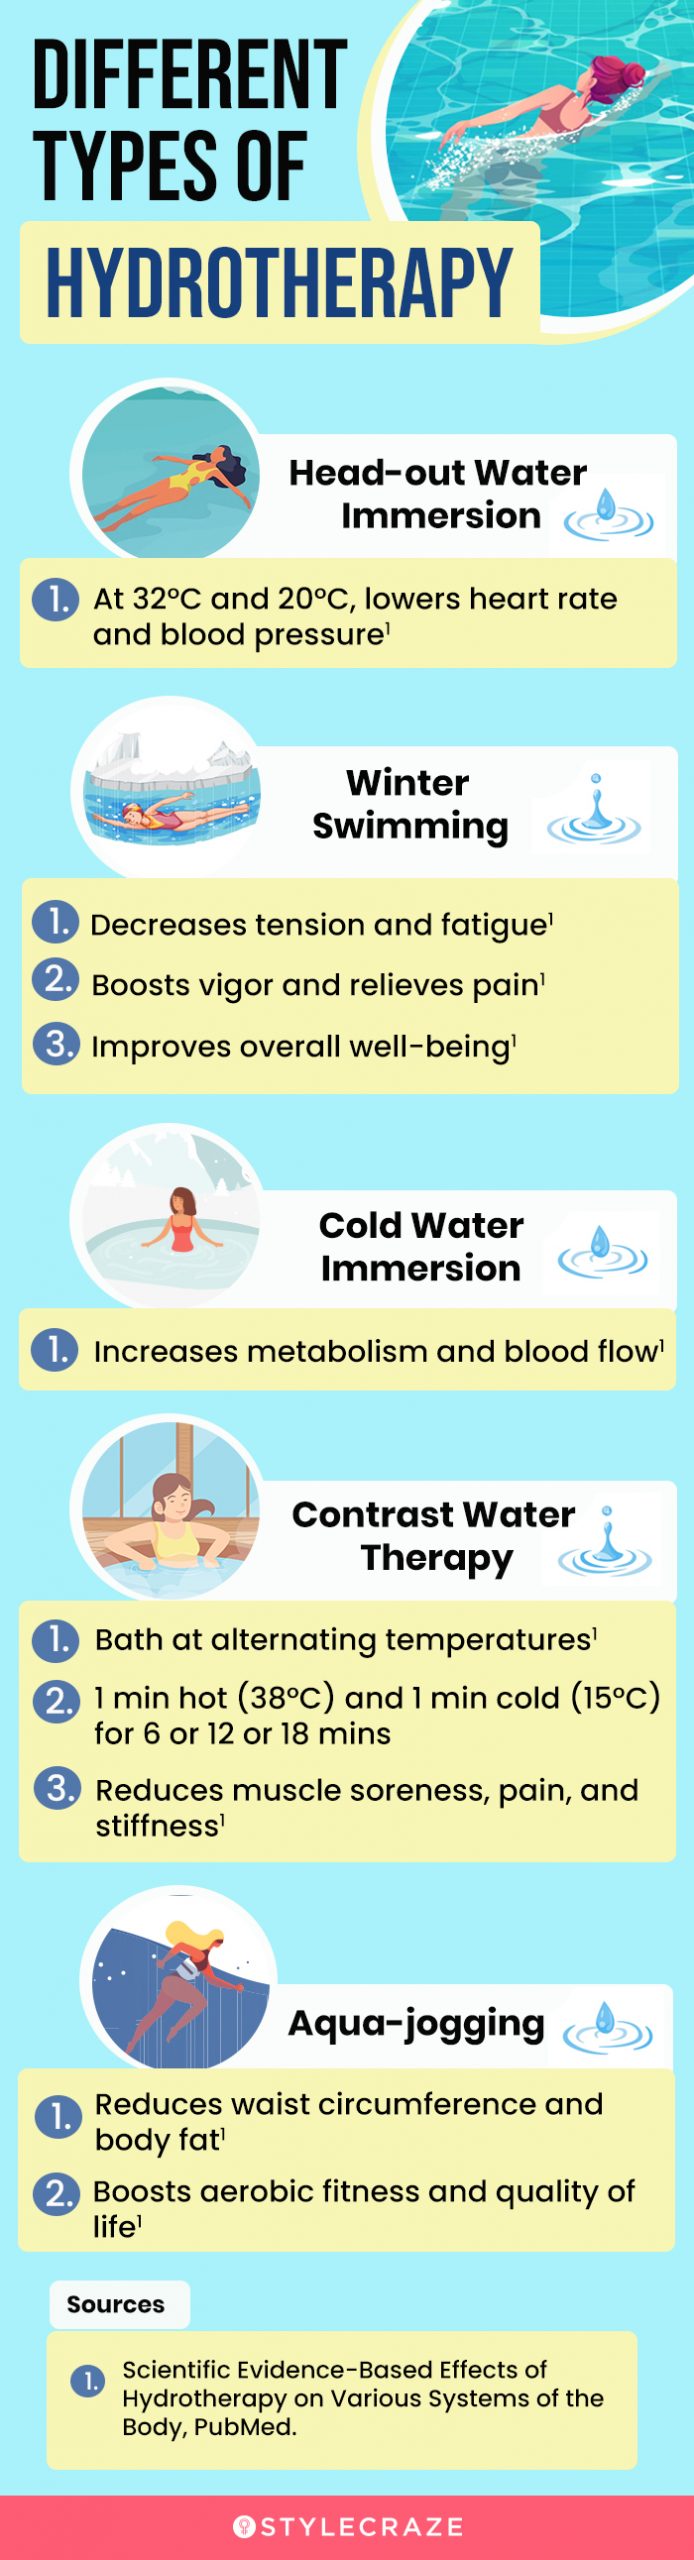 different types of hydrotherapy [infographic]